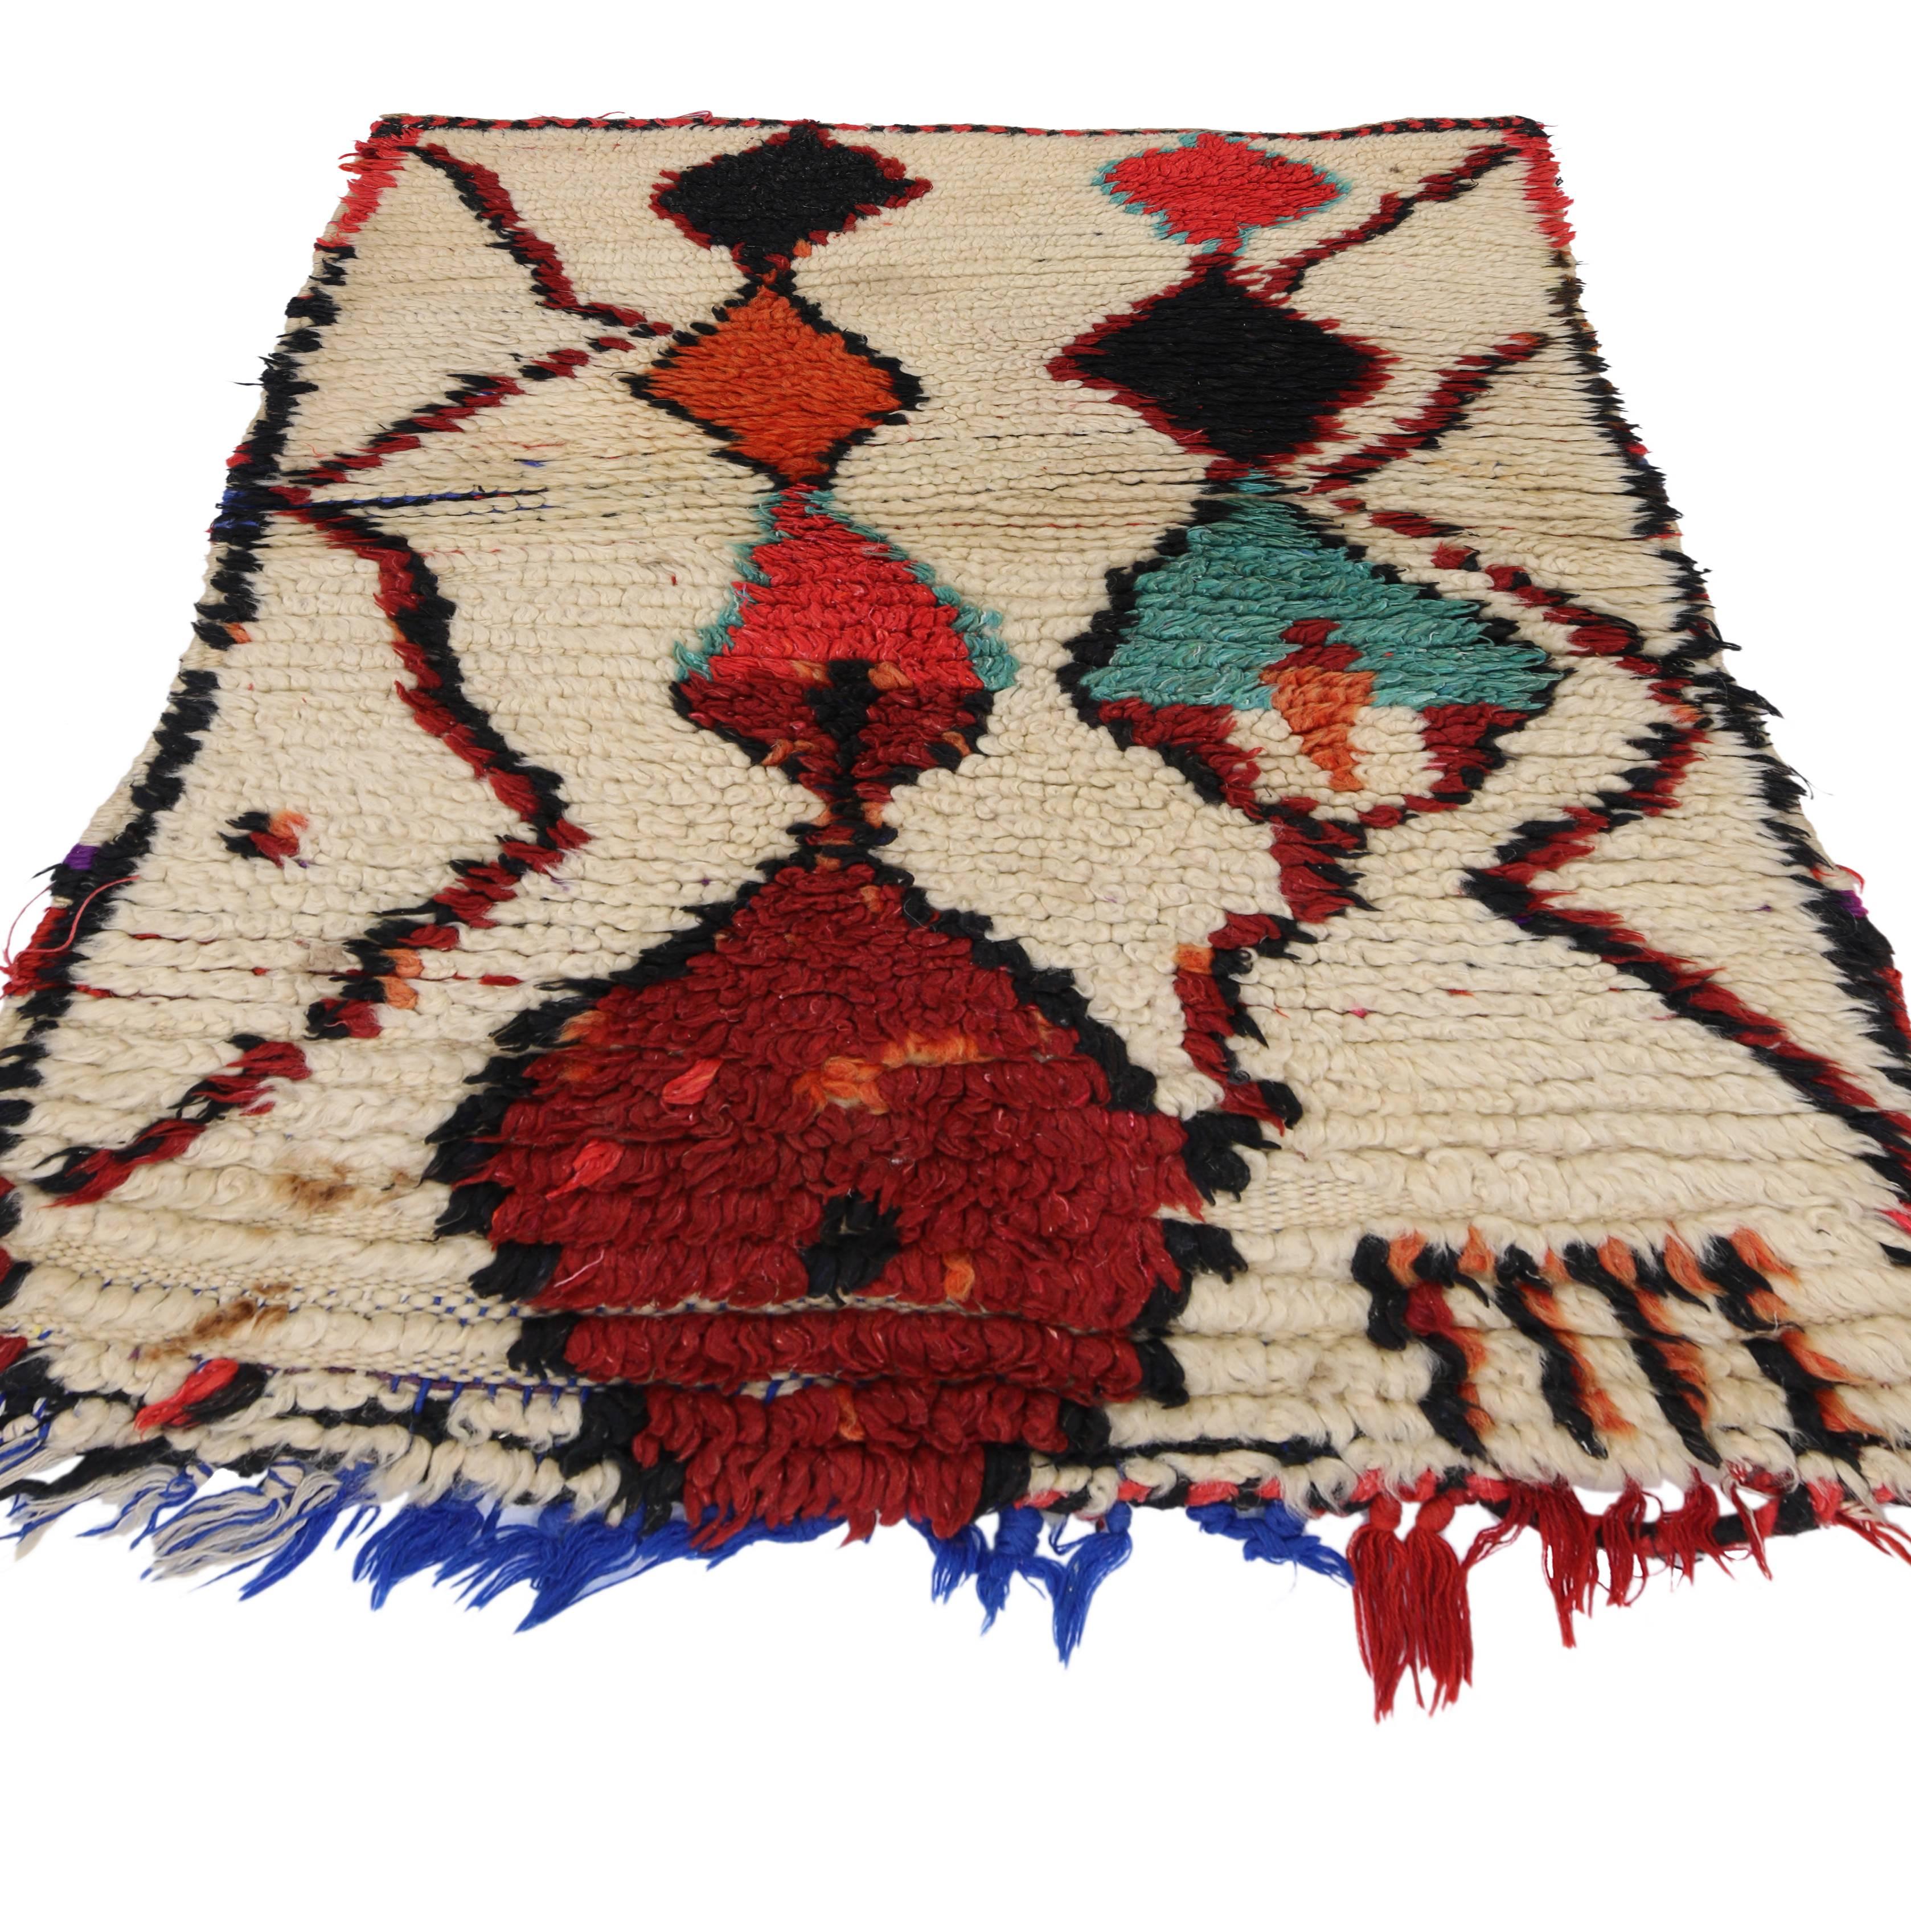 Hand-Knotted Vintage Berber Moroccan Azilal Rug with Bohemian Tribal Style